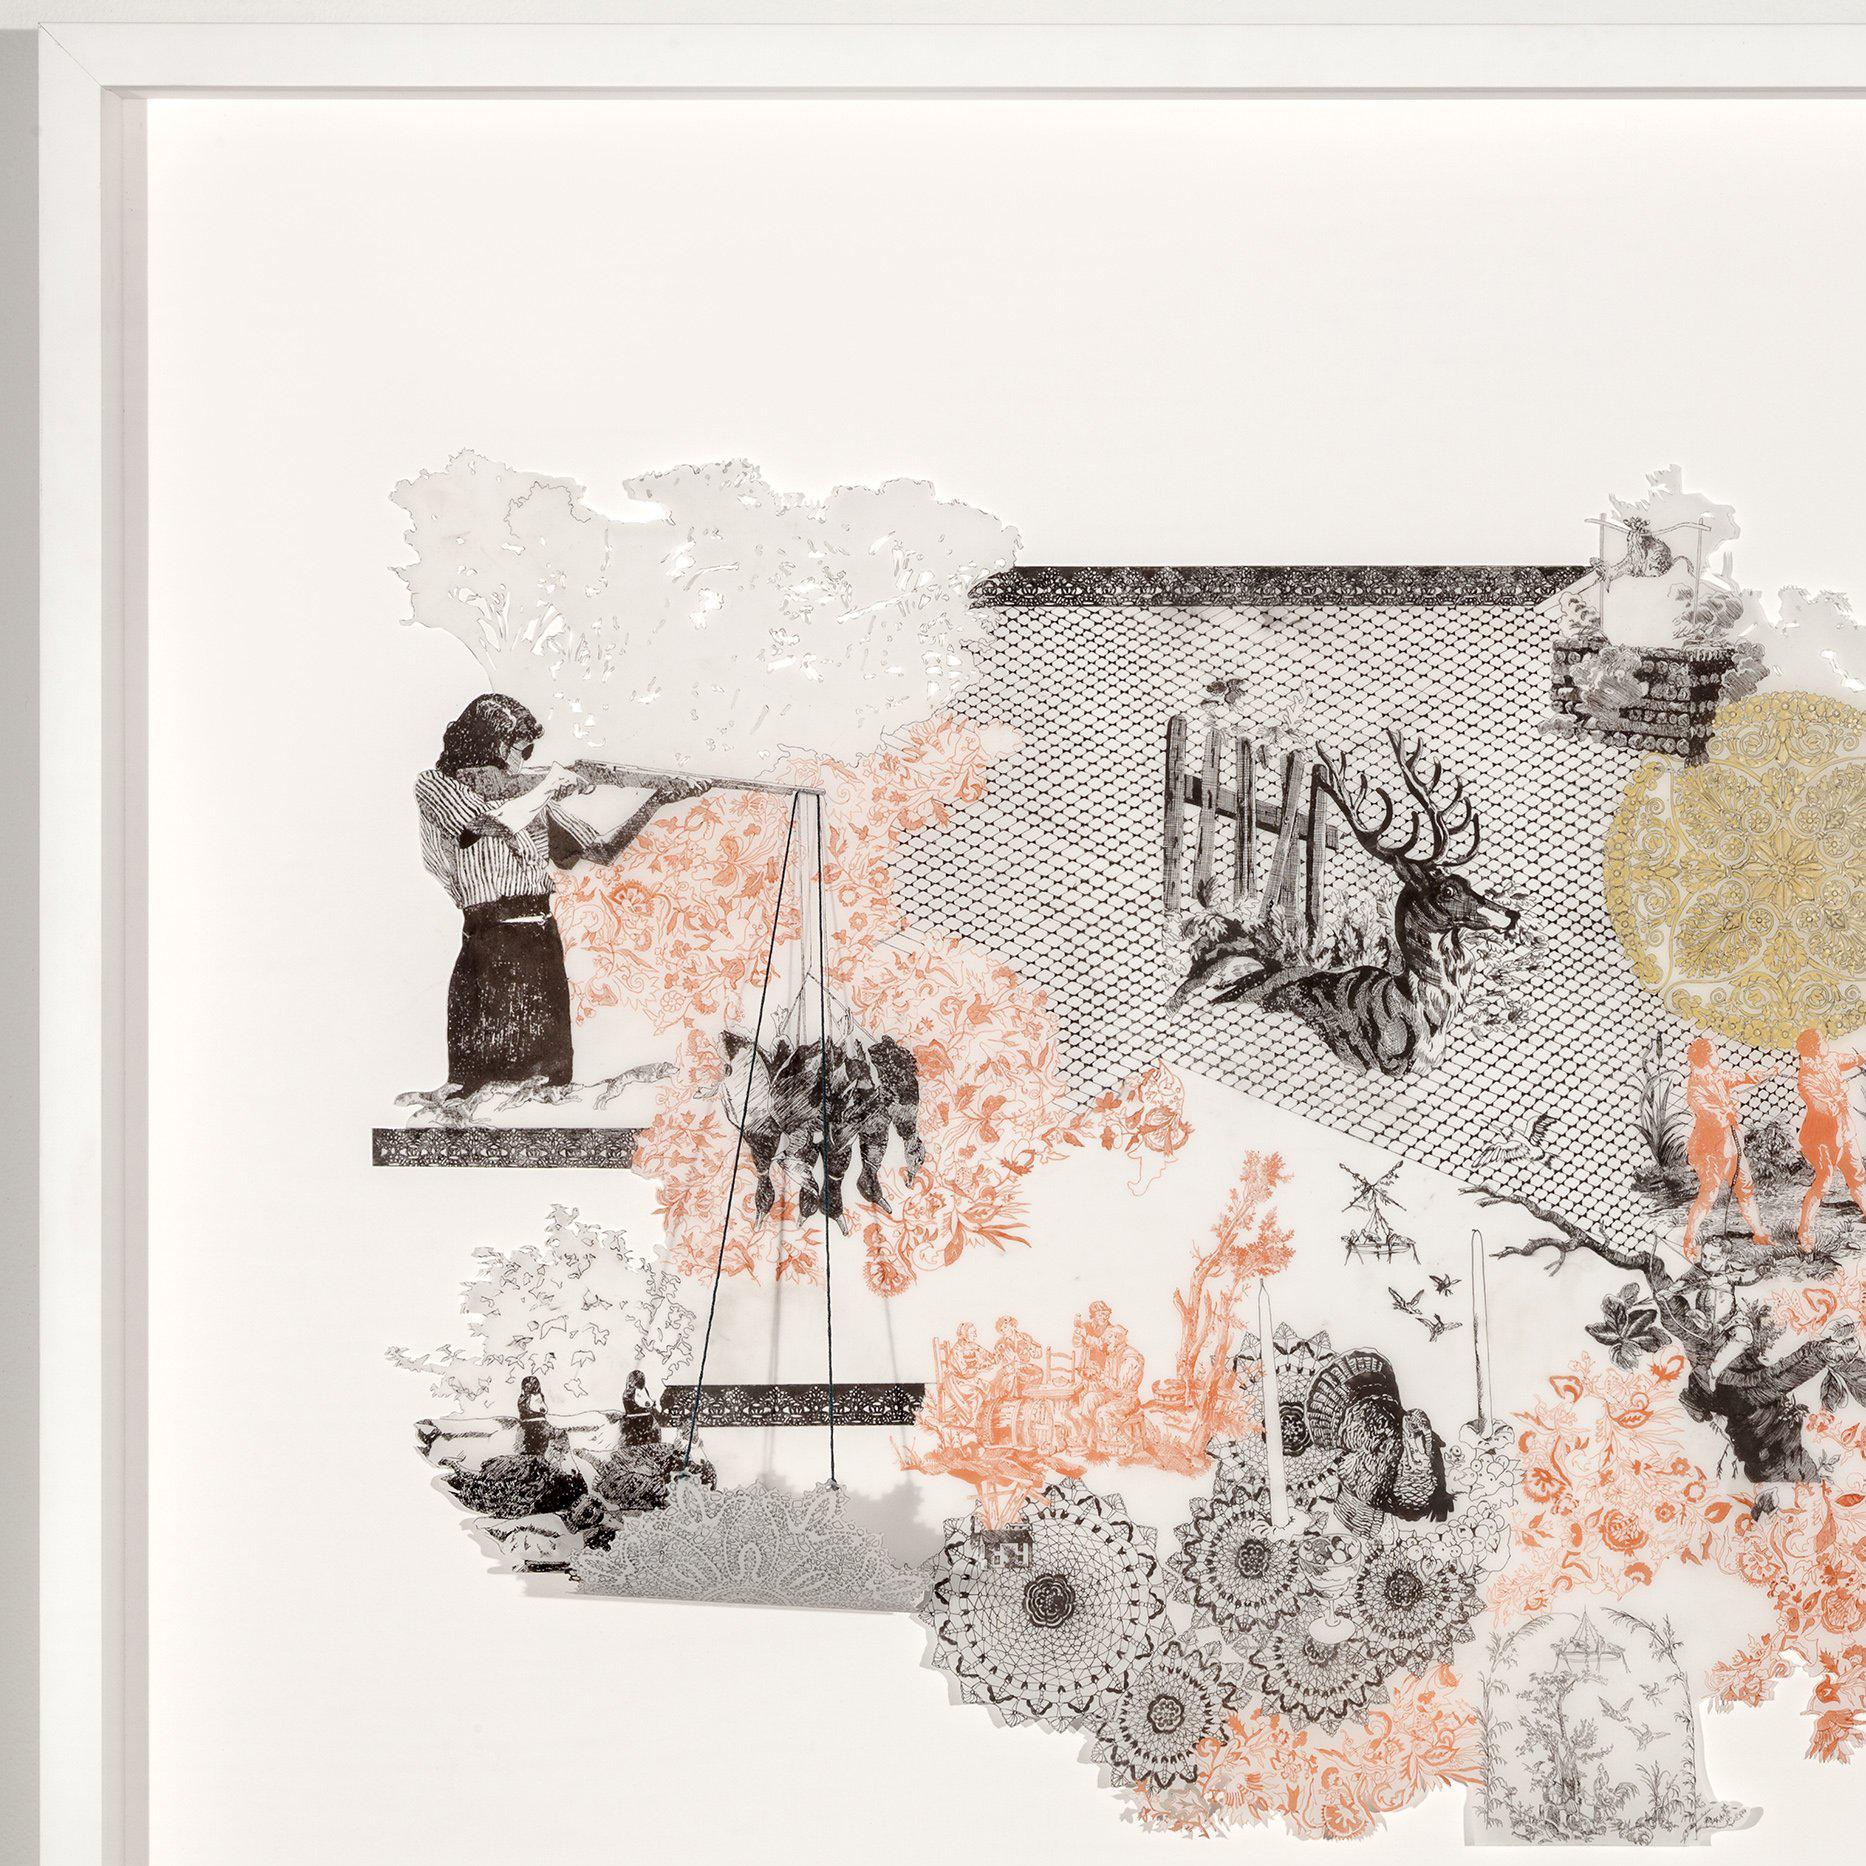 medium: ink on hand-cut mylar


Laura Tanner Graham's drawings and installations are often discussed as part of the Southern Gothic literary tradition, sharing similar themes with authors such as Flannery O’Connor and Eudora Welty. As a Georgia